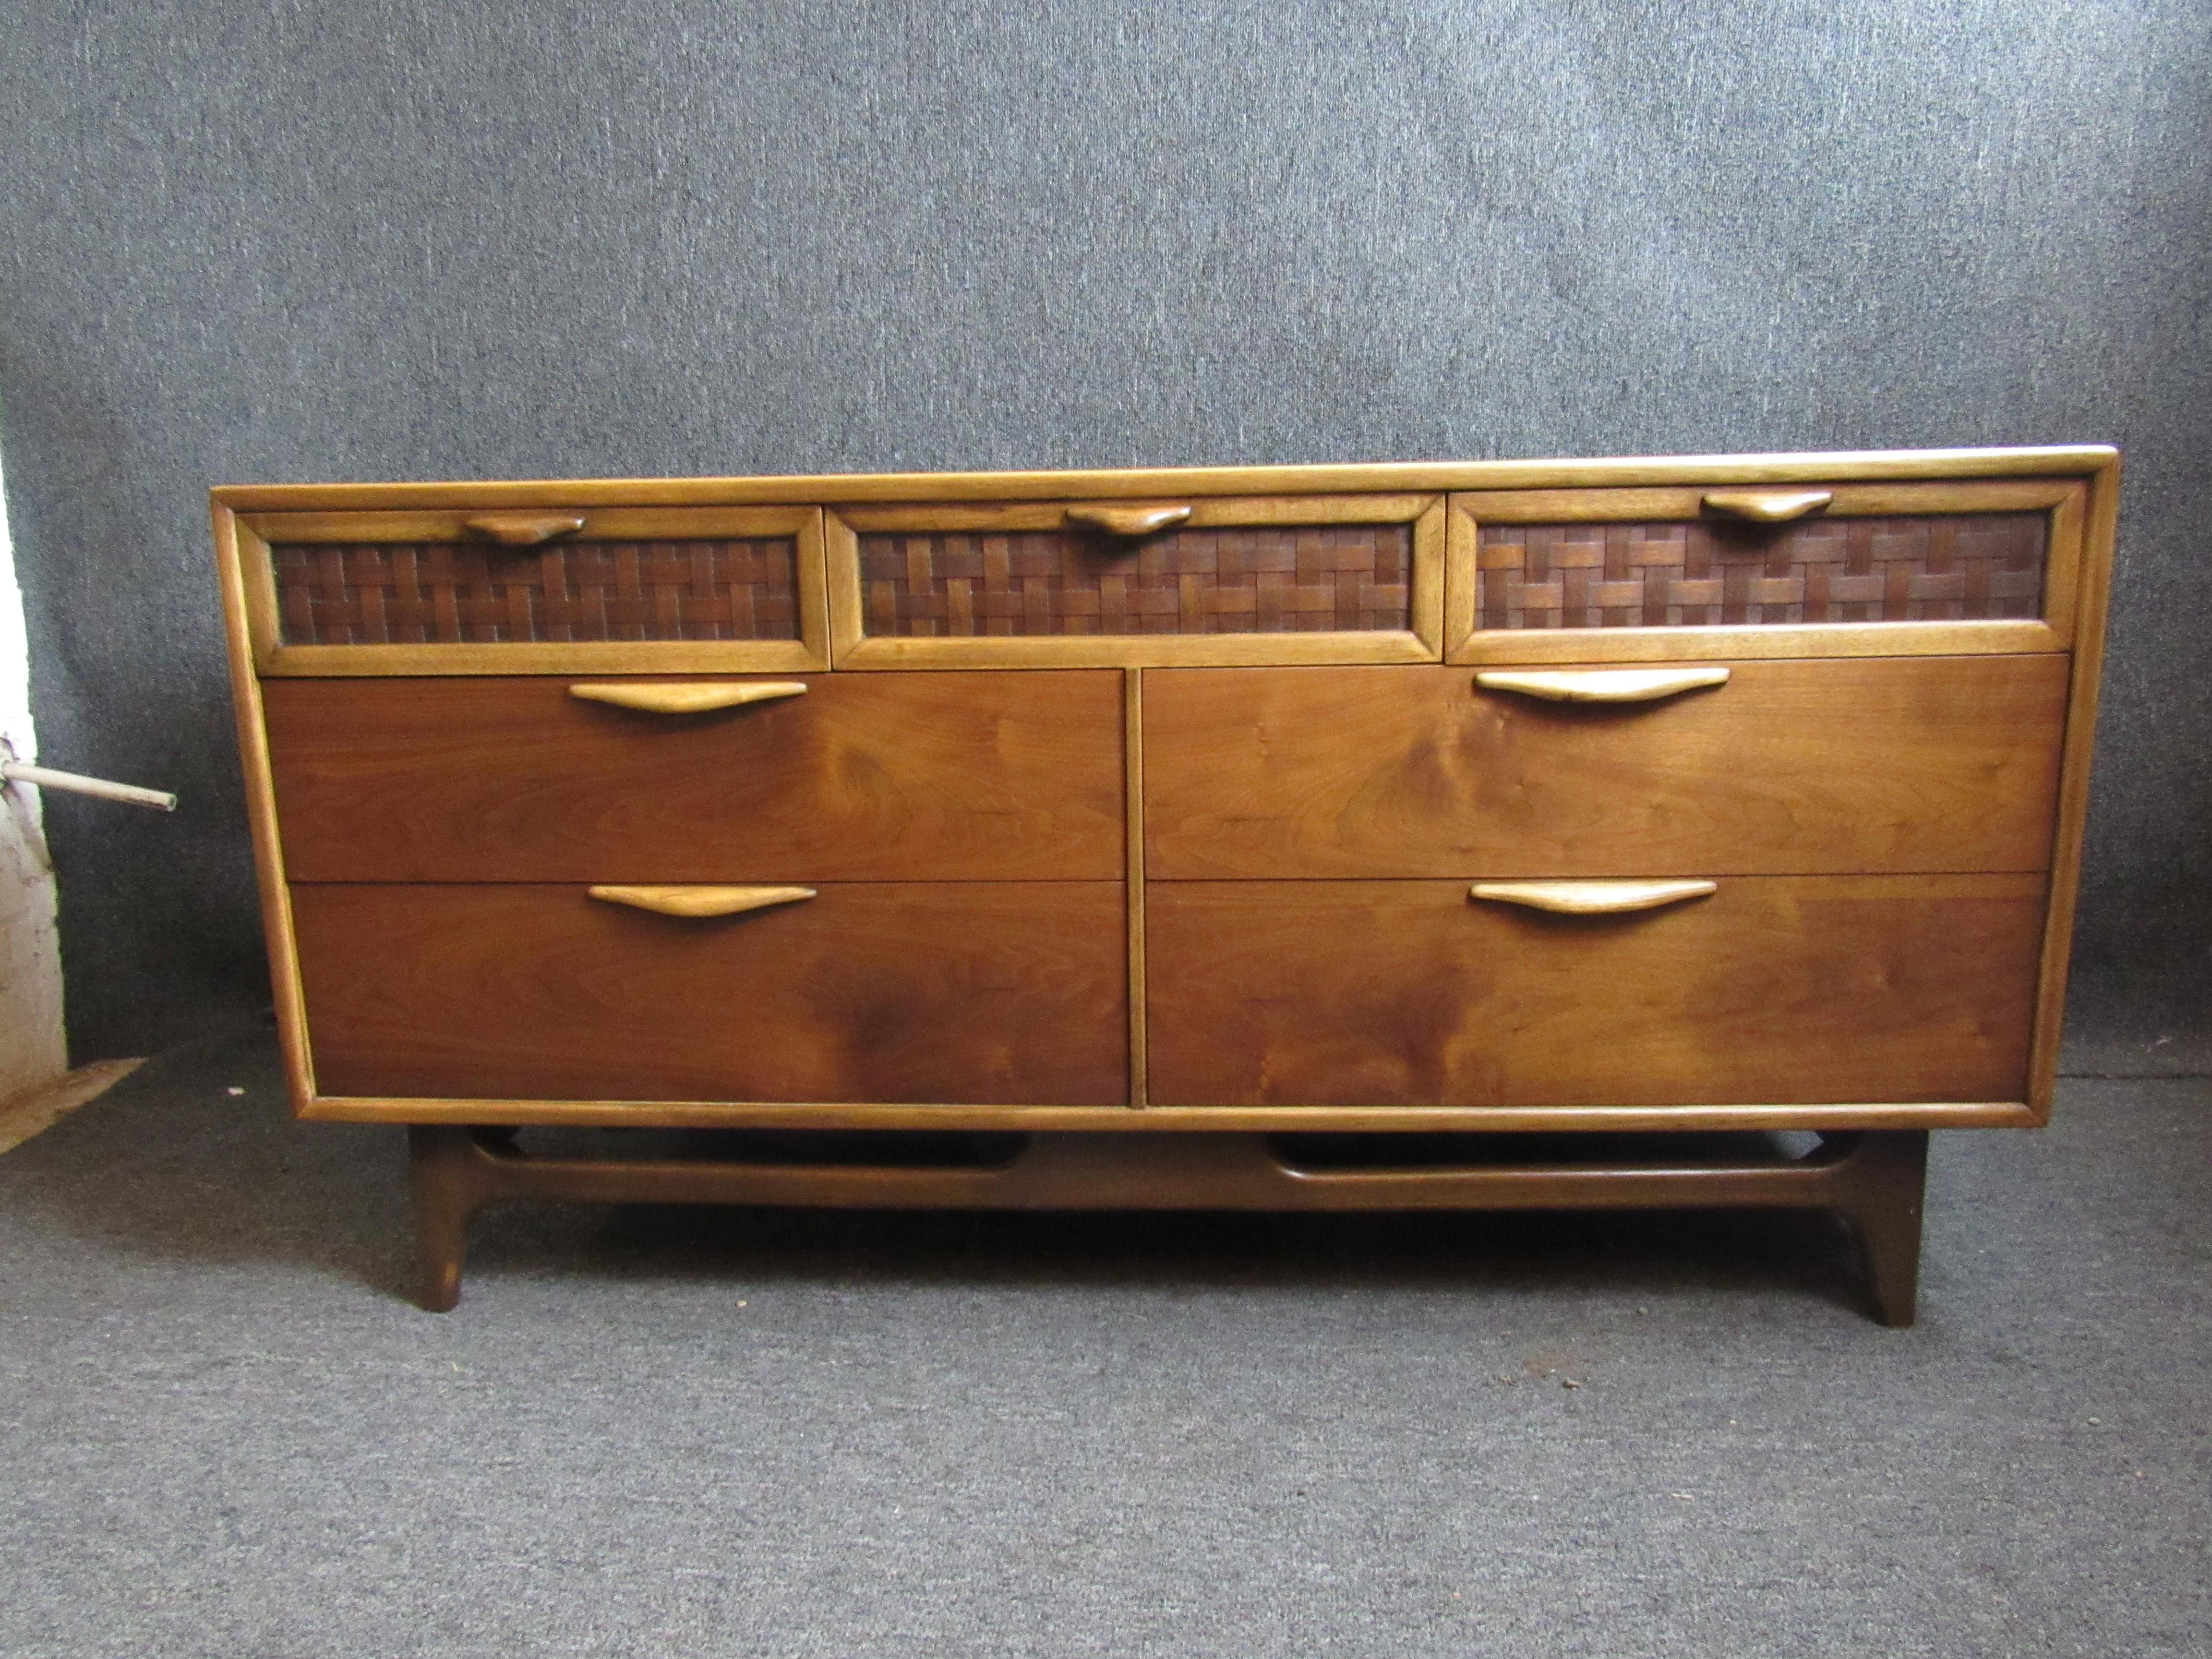 Gorgeous mid-century walnut credenza made by the Lane Furniture Company. Beautiful natural wood grains come together with unique lattice accents on the drawers for a piece that is sure to be the highlight of any room in the home or office. Seven